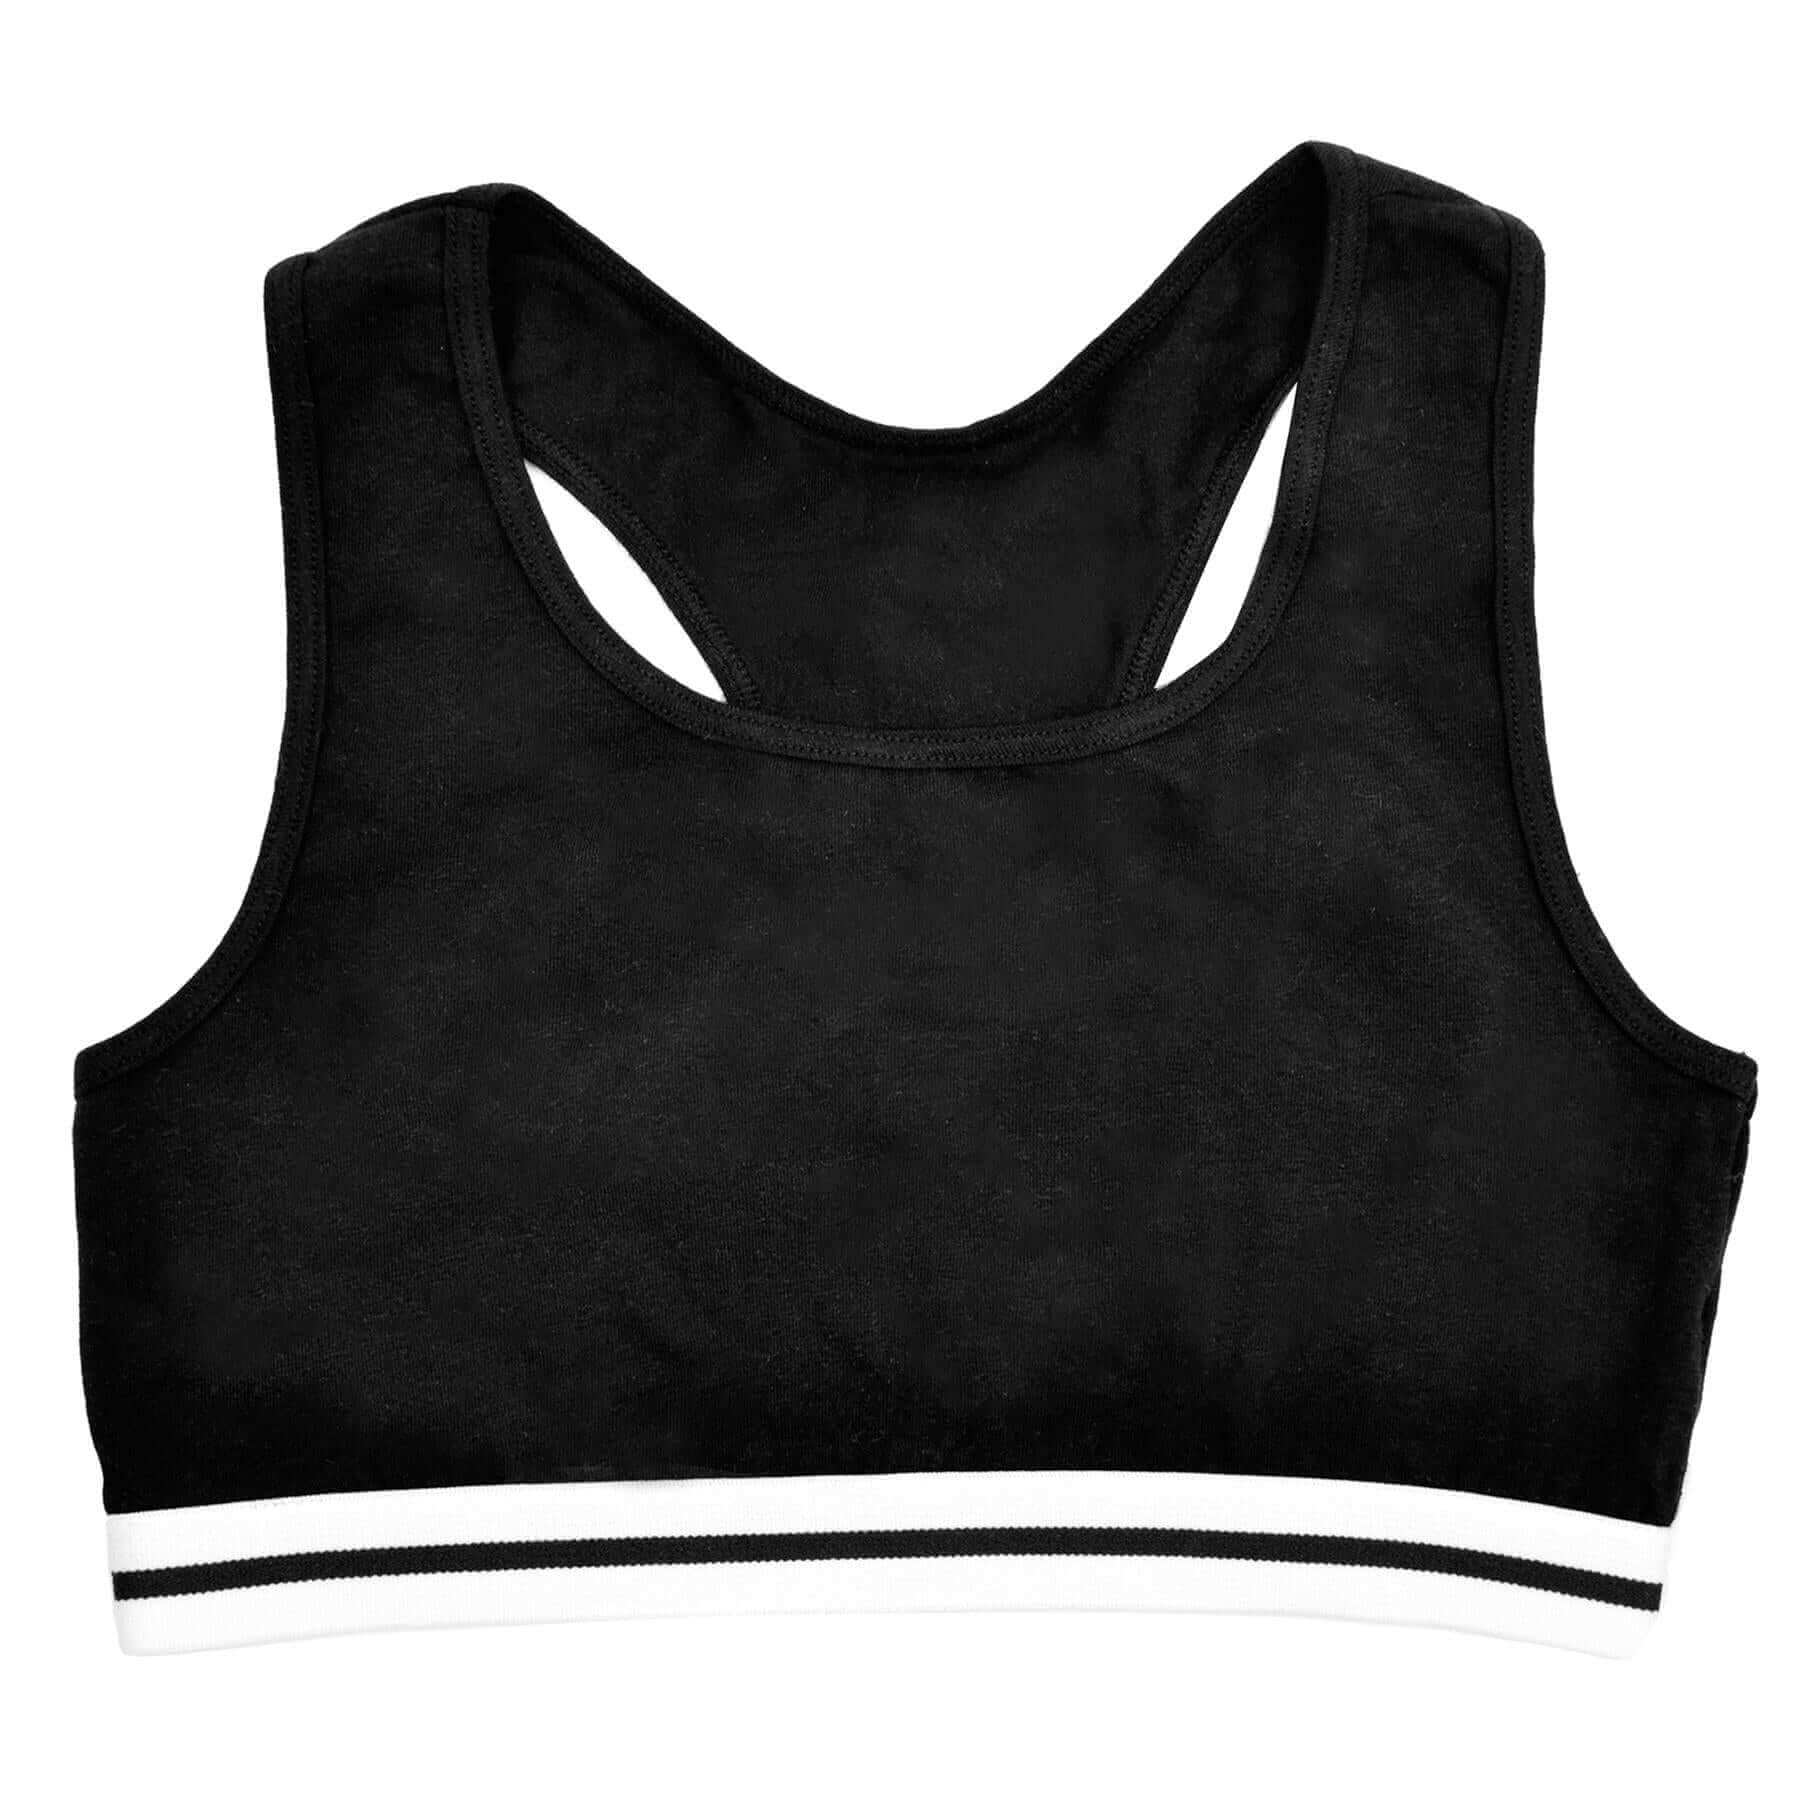 Pack Of 4 Girls Racer Back Crop Top Training Bra Seamless Sports Bralettes Children Active Teens Yoga Workout Vest Running. Buy now for £13.00. A Underwear by Daisy Dreamer. activewear, assorted, athletics, black, bras, breathable, childrens, clothing, co